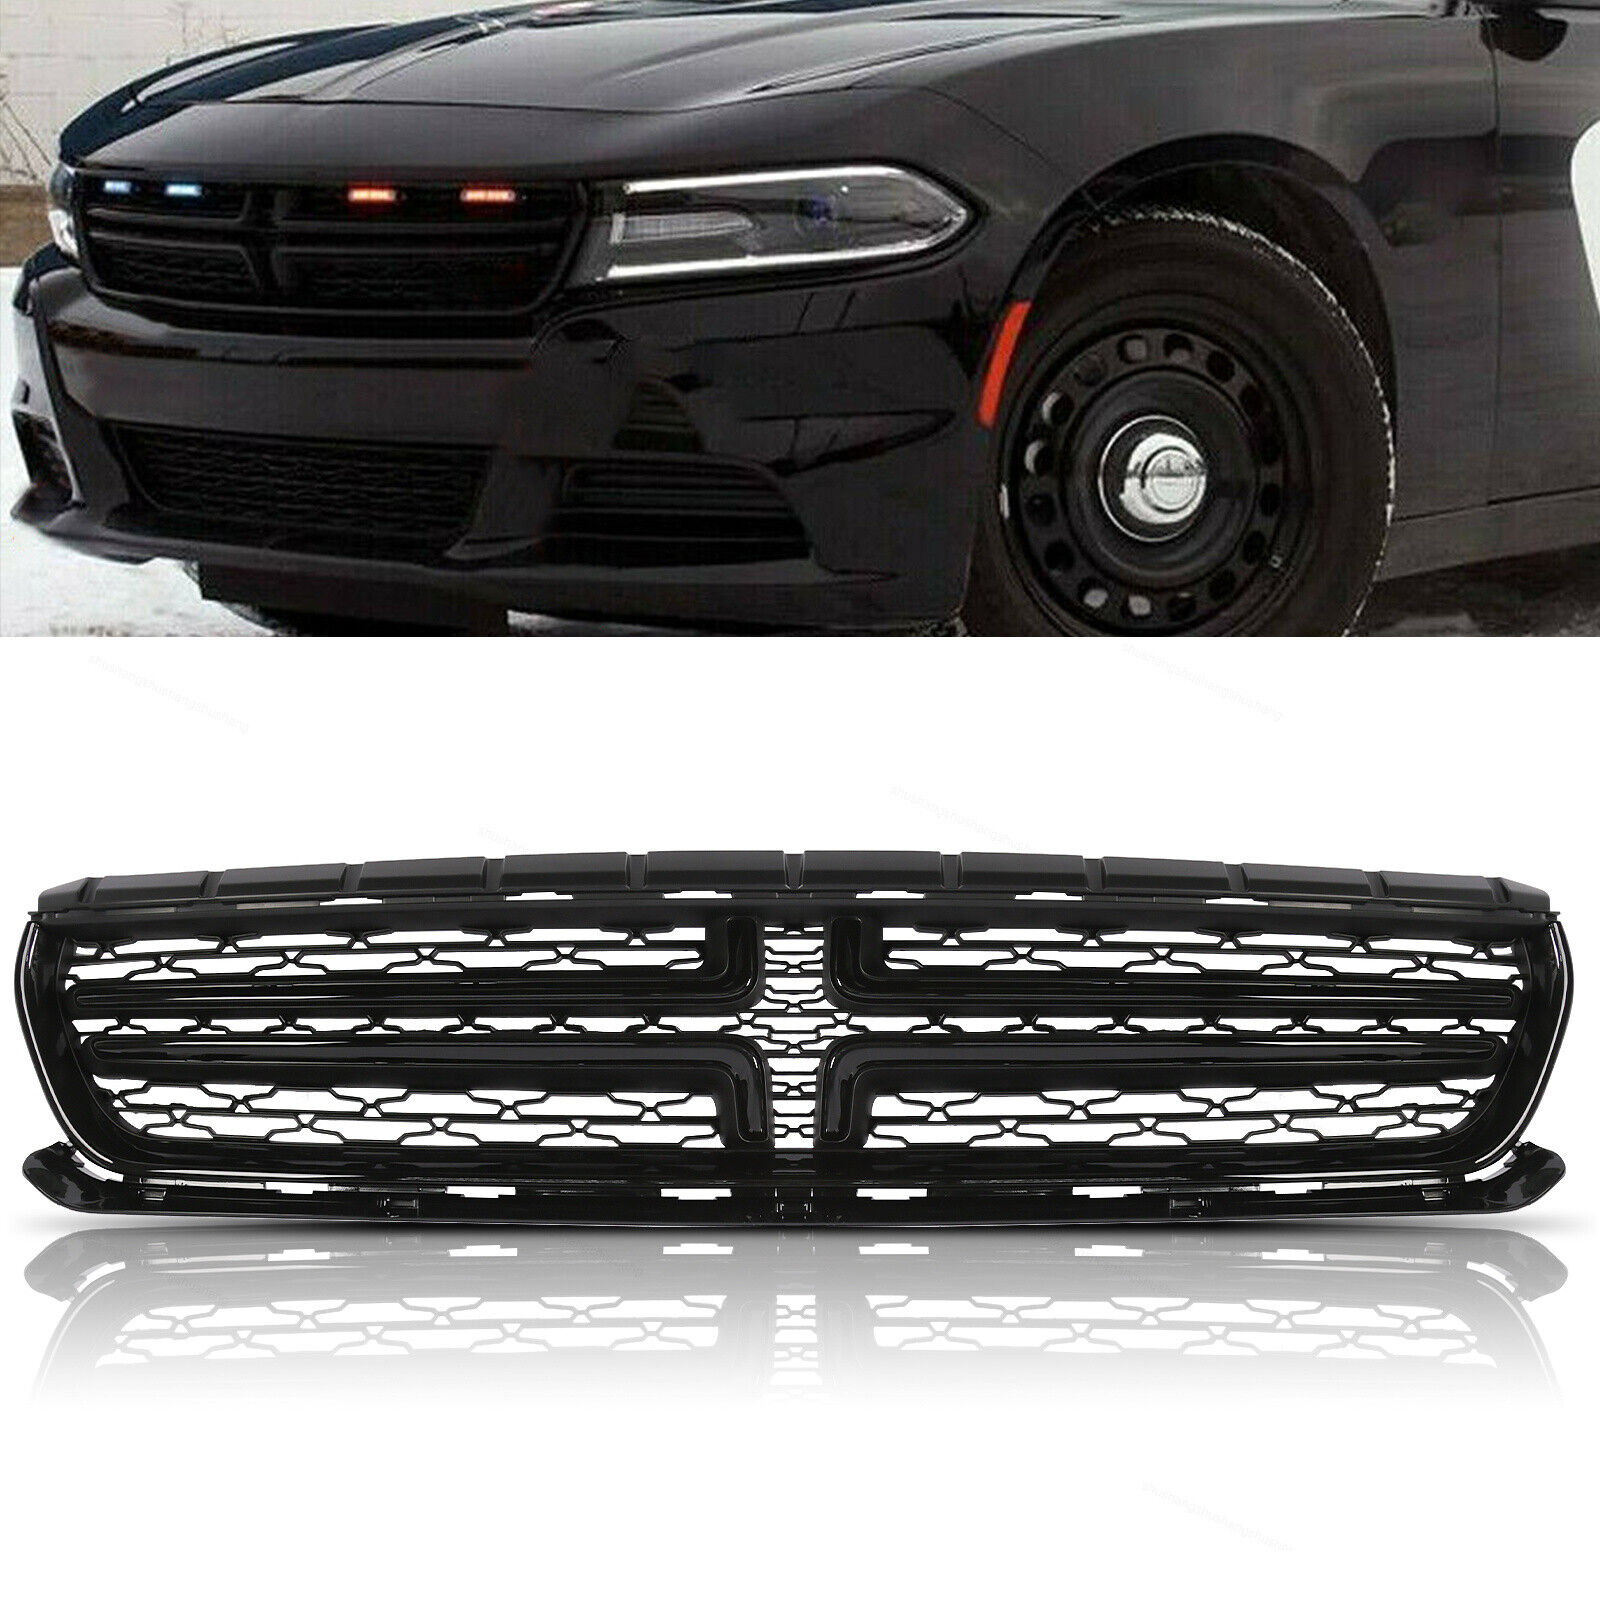 Fits 2015-17 18 Dodge Charger Grill Factory Style Bumper Radiator Upper Grille